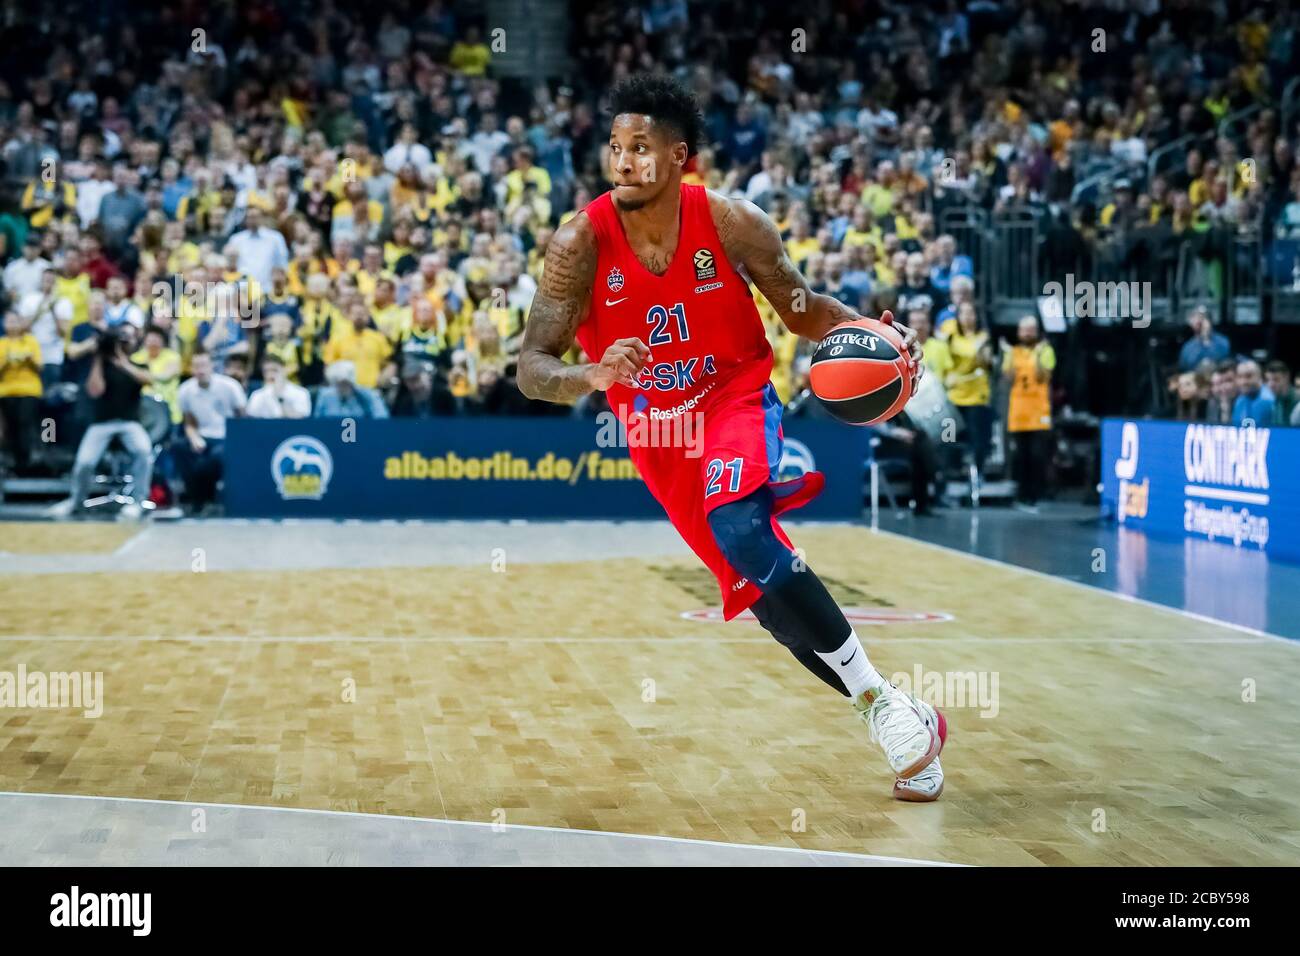 Berlin, Germany, October 25, 2019: Will Clyburn of CSKA Moscow in action during the EuroLeague basketball game between Alba Berlin and CSKA Moscow Stock Photo